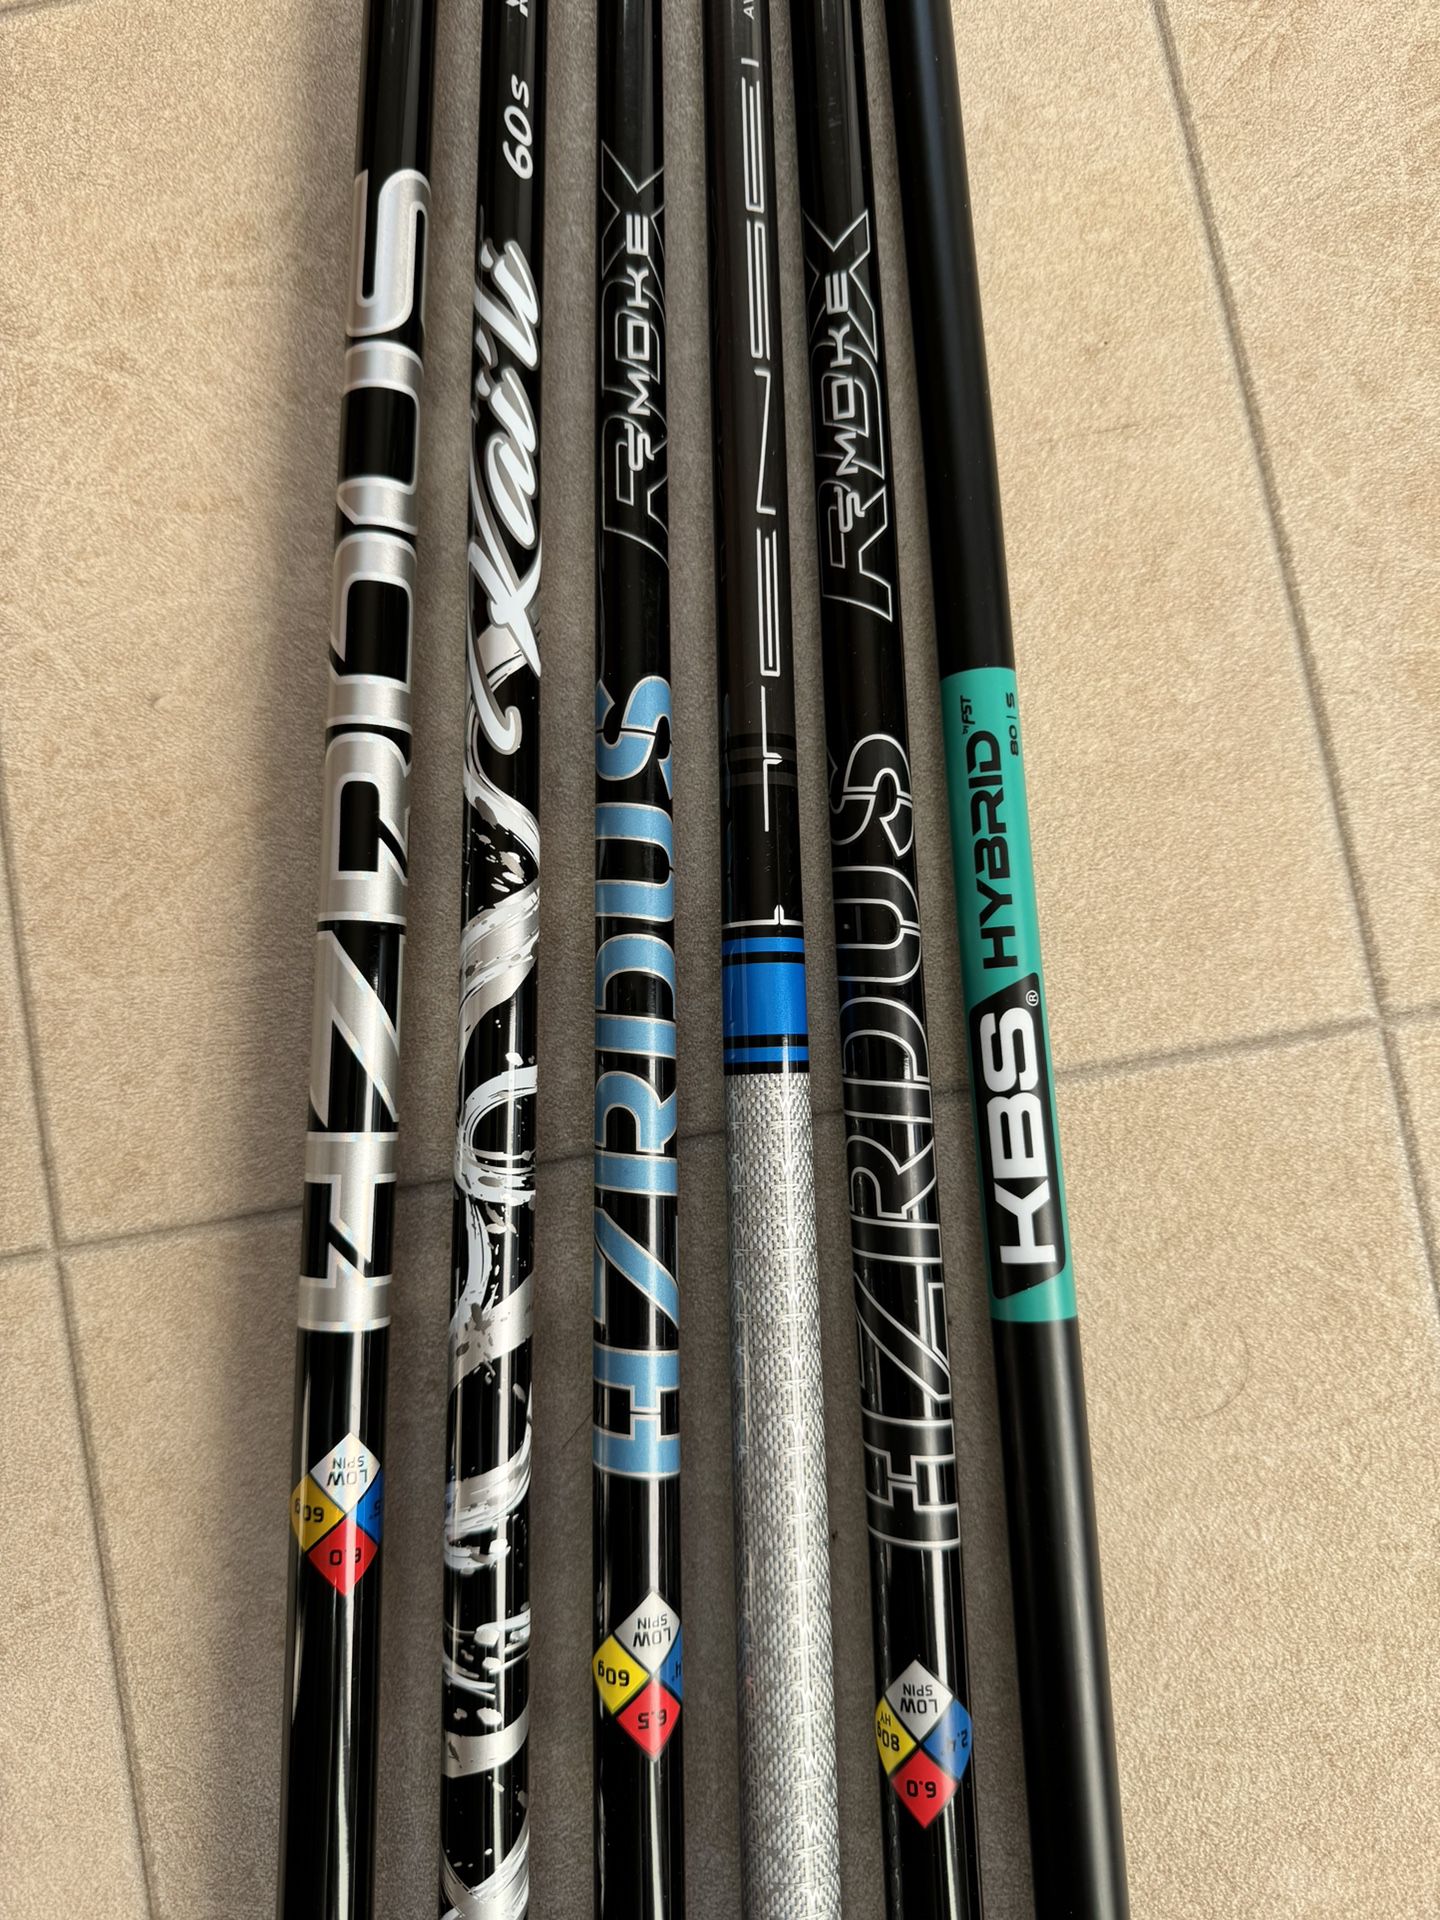 Driver, Wood, And Hybrid/Iron Shafts 